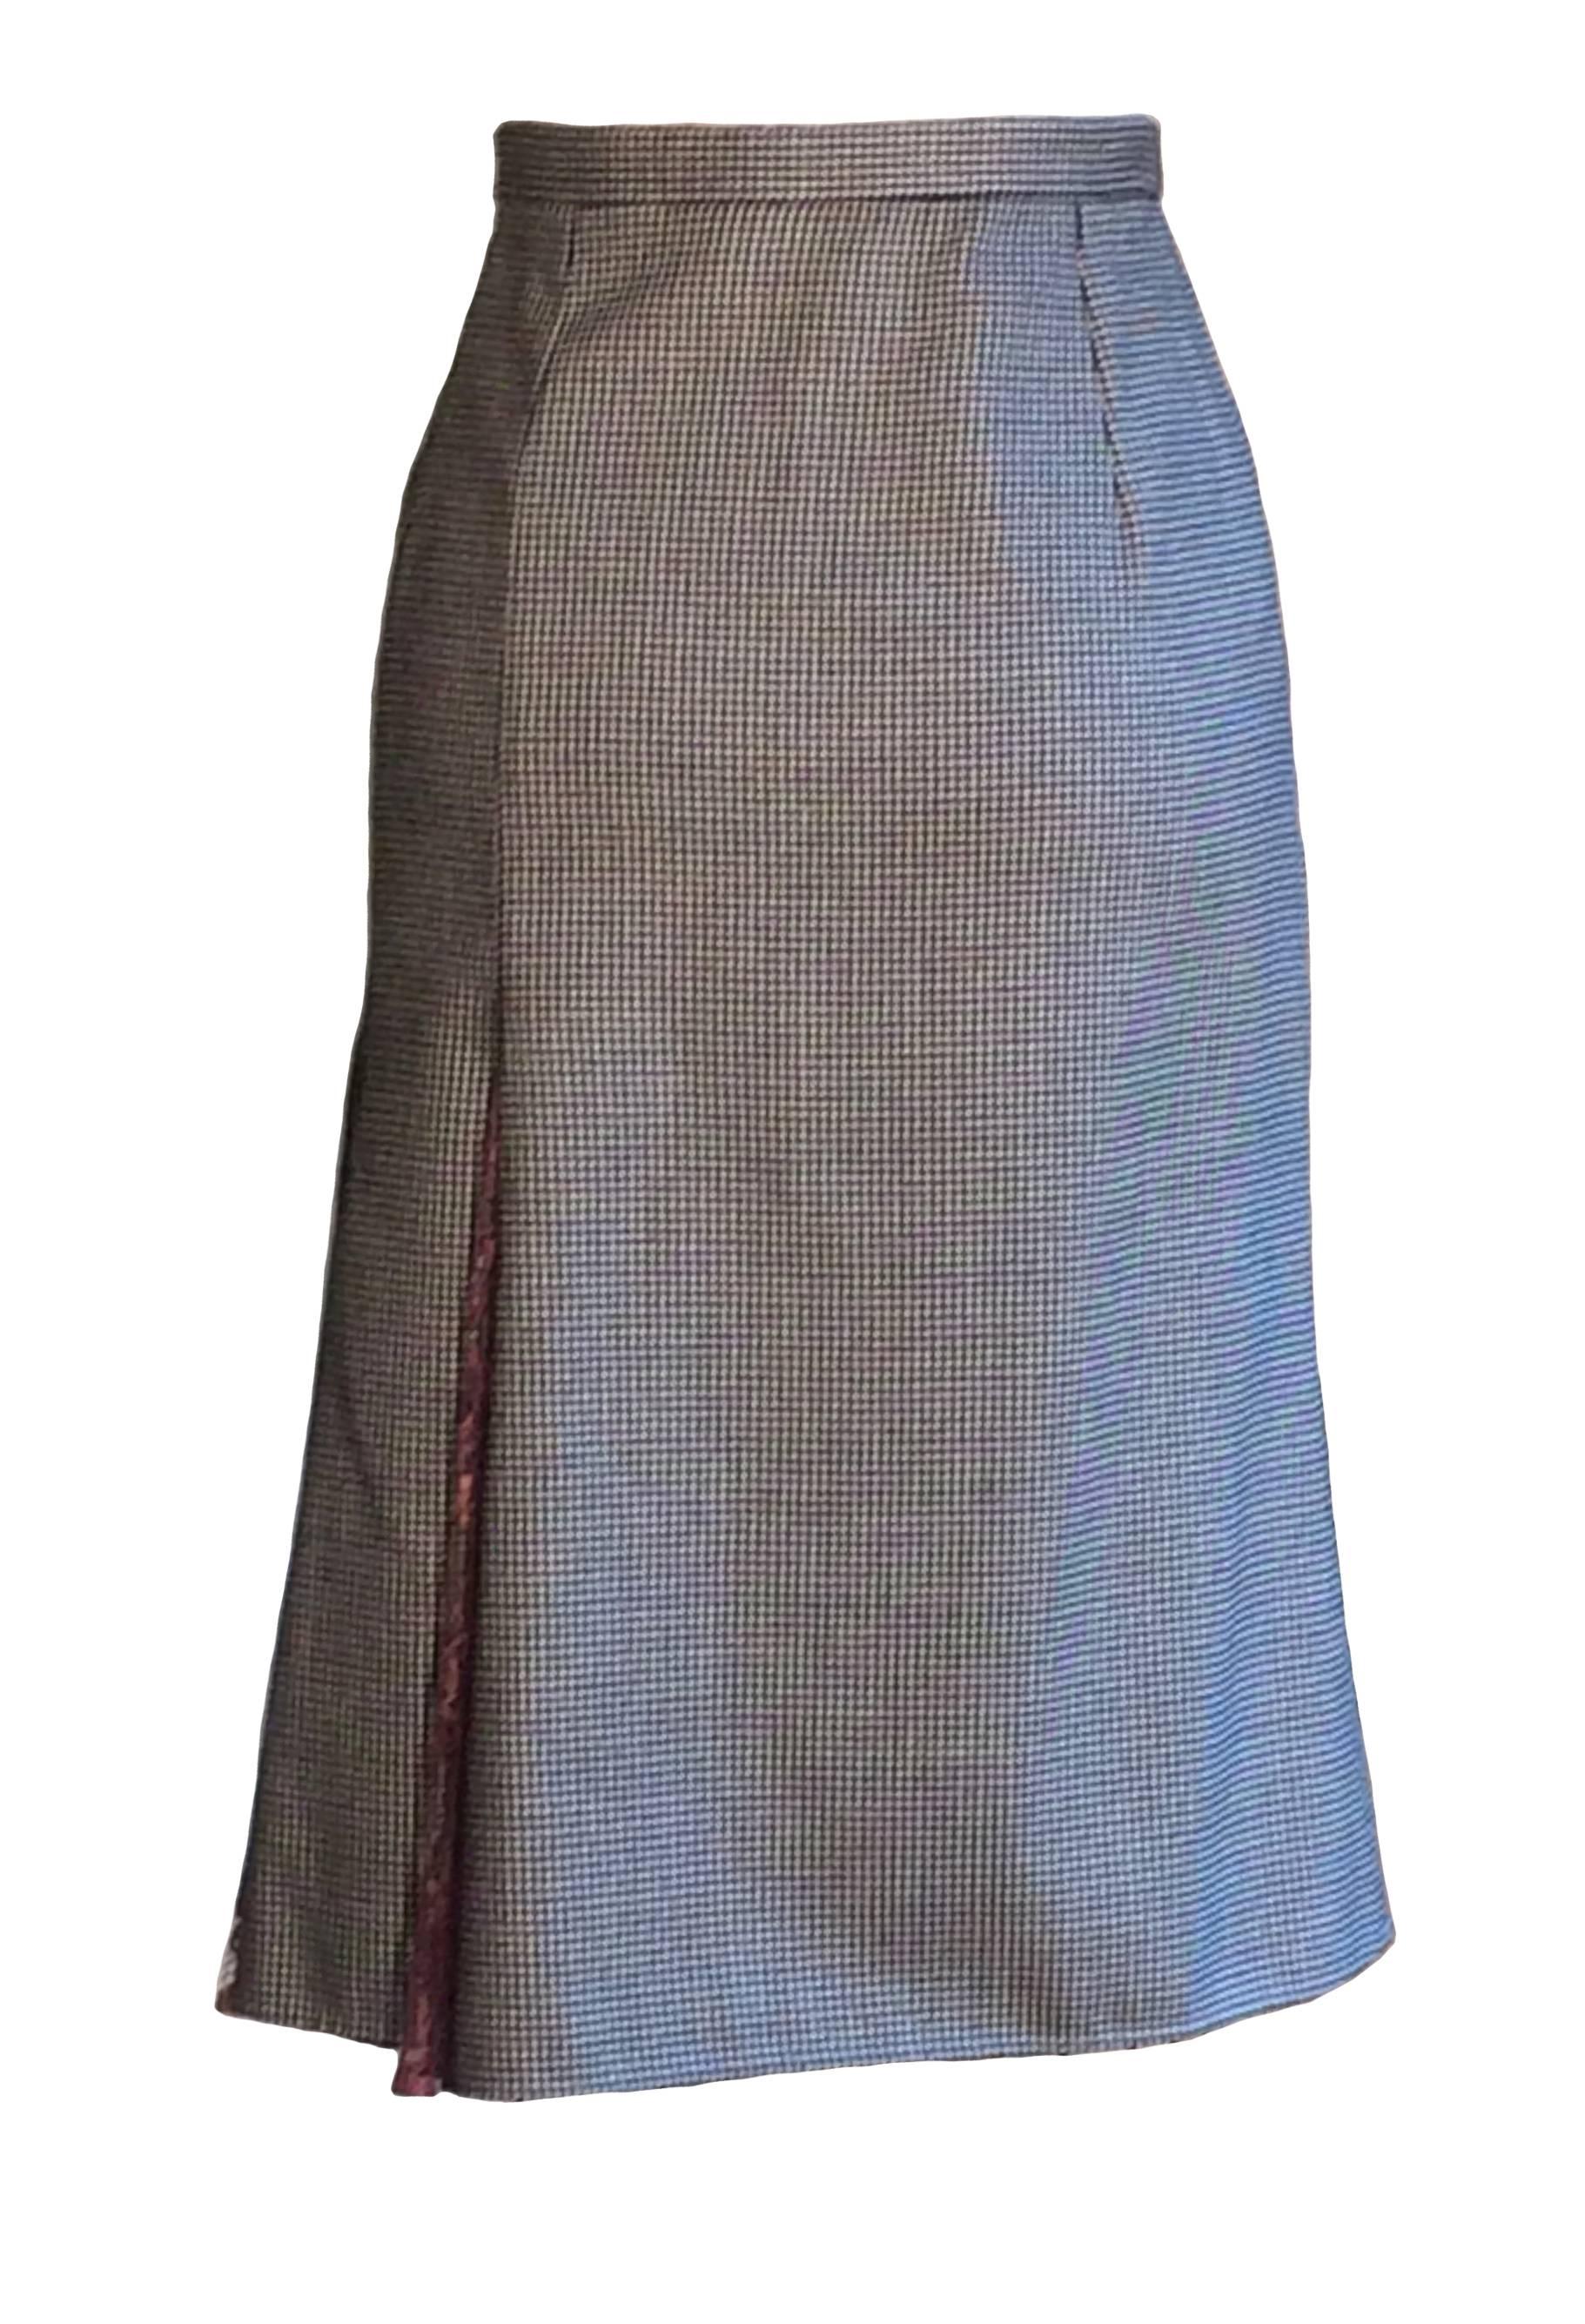 Gray Dolce & Gabbana Black and White Houndstooth Pencil Skirt with Mauve Lace Accents